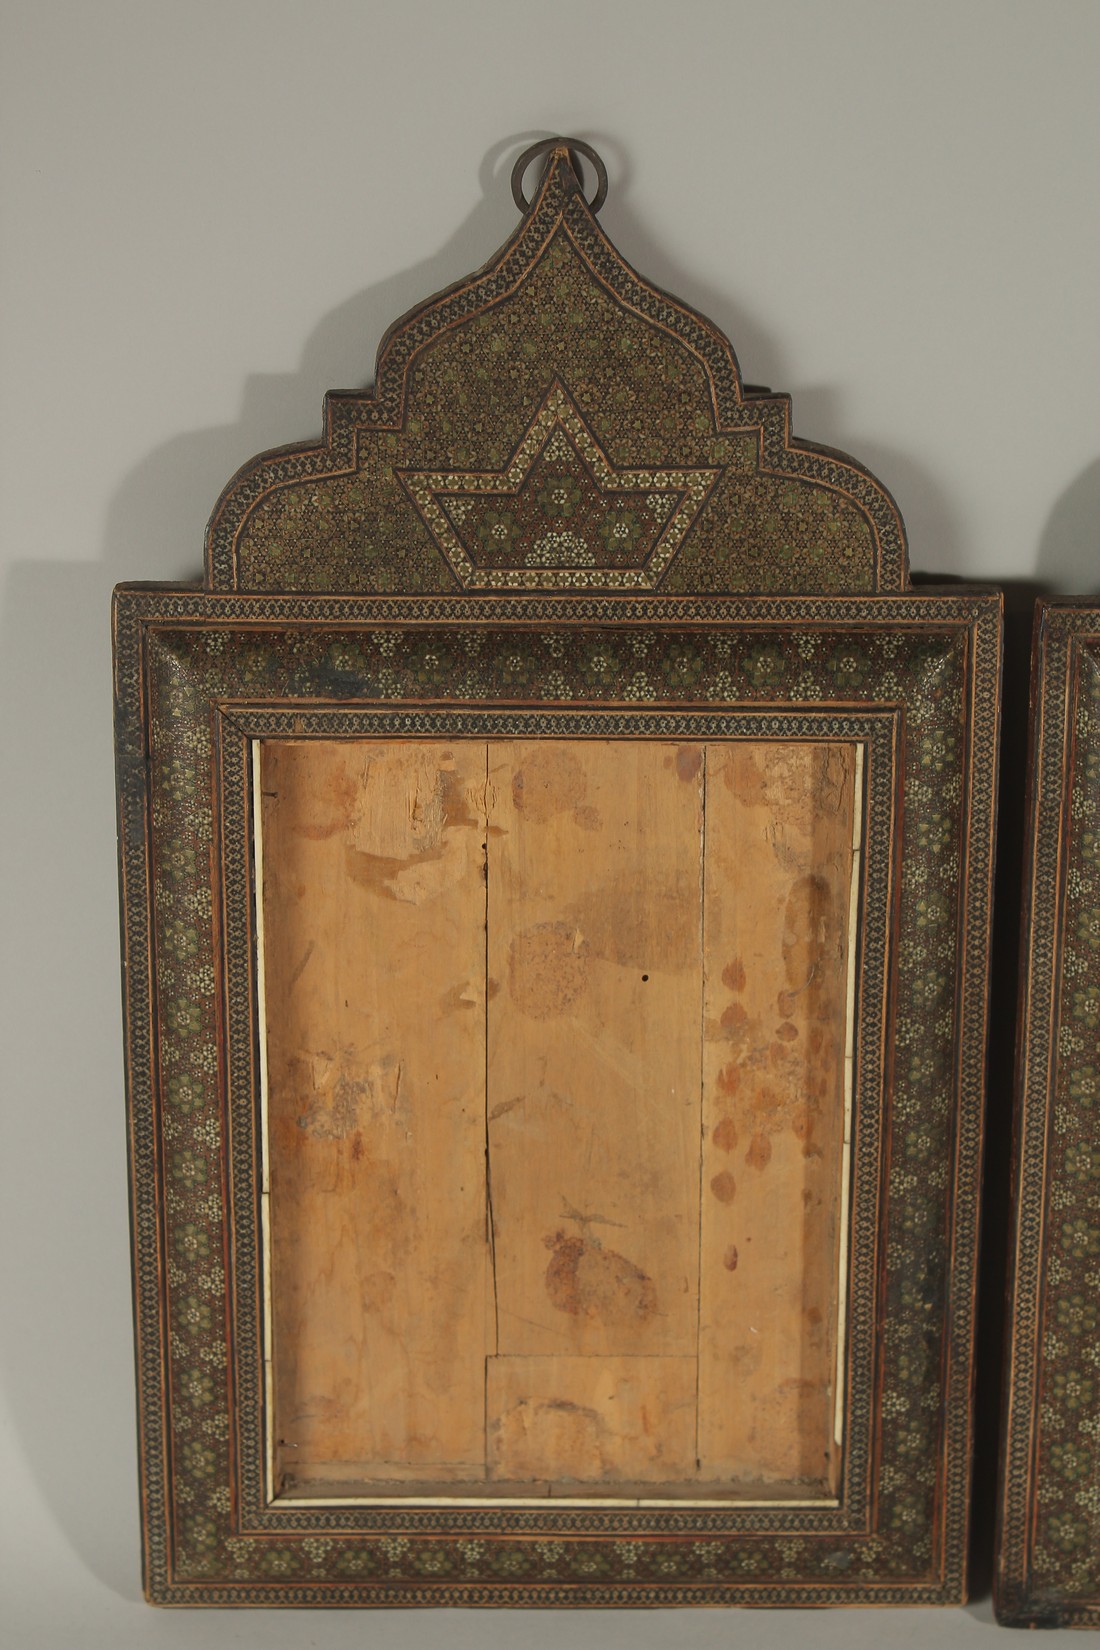 TWO LARGE 19TH CENTURY PERSIAN QAJAR MOSAIC INLAID WOODEN FRAMES, 49cm x 28cm, (2). - Image 2 of 4